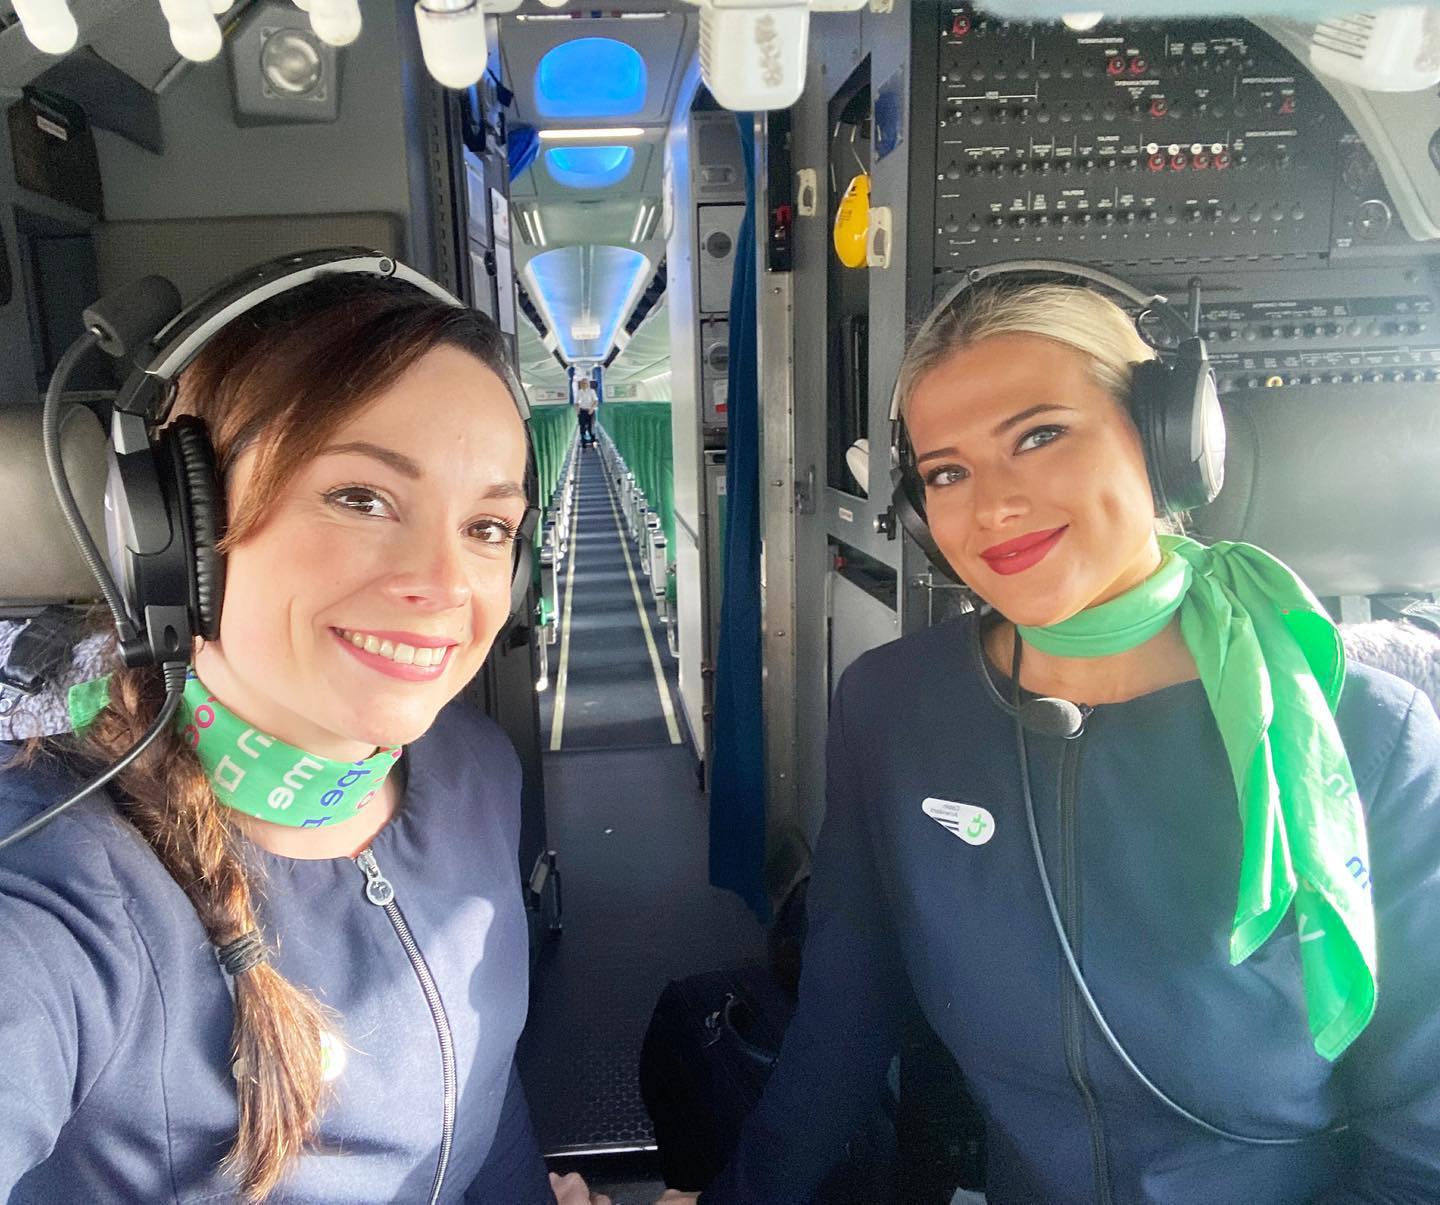 Always fun with @k.ellocs 💚 Pic of yesterday, when Kelly took the captains seat and I the co-pilot’s one (for a picture) ✈️ We met in September 2017 when I was a passenger on her flight to Lisbon. And two months after that, I got hired myself. Feels like yesterday. Today, I am going back to Lisbon on holiday (not work) for the 4th time ✈️
.
.
.
.
.
.
.
.
#stewardess #flightattendant #cabincrew #cabinattendant #modeblog #fashionblogger #modeblogger #outfit #fashionblogger_nl #cabincrew  #elegant #beautypageant #denbosch #shertogenbosch  #missworldfinalist #airhostess #transavia